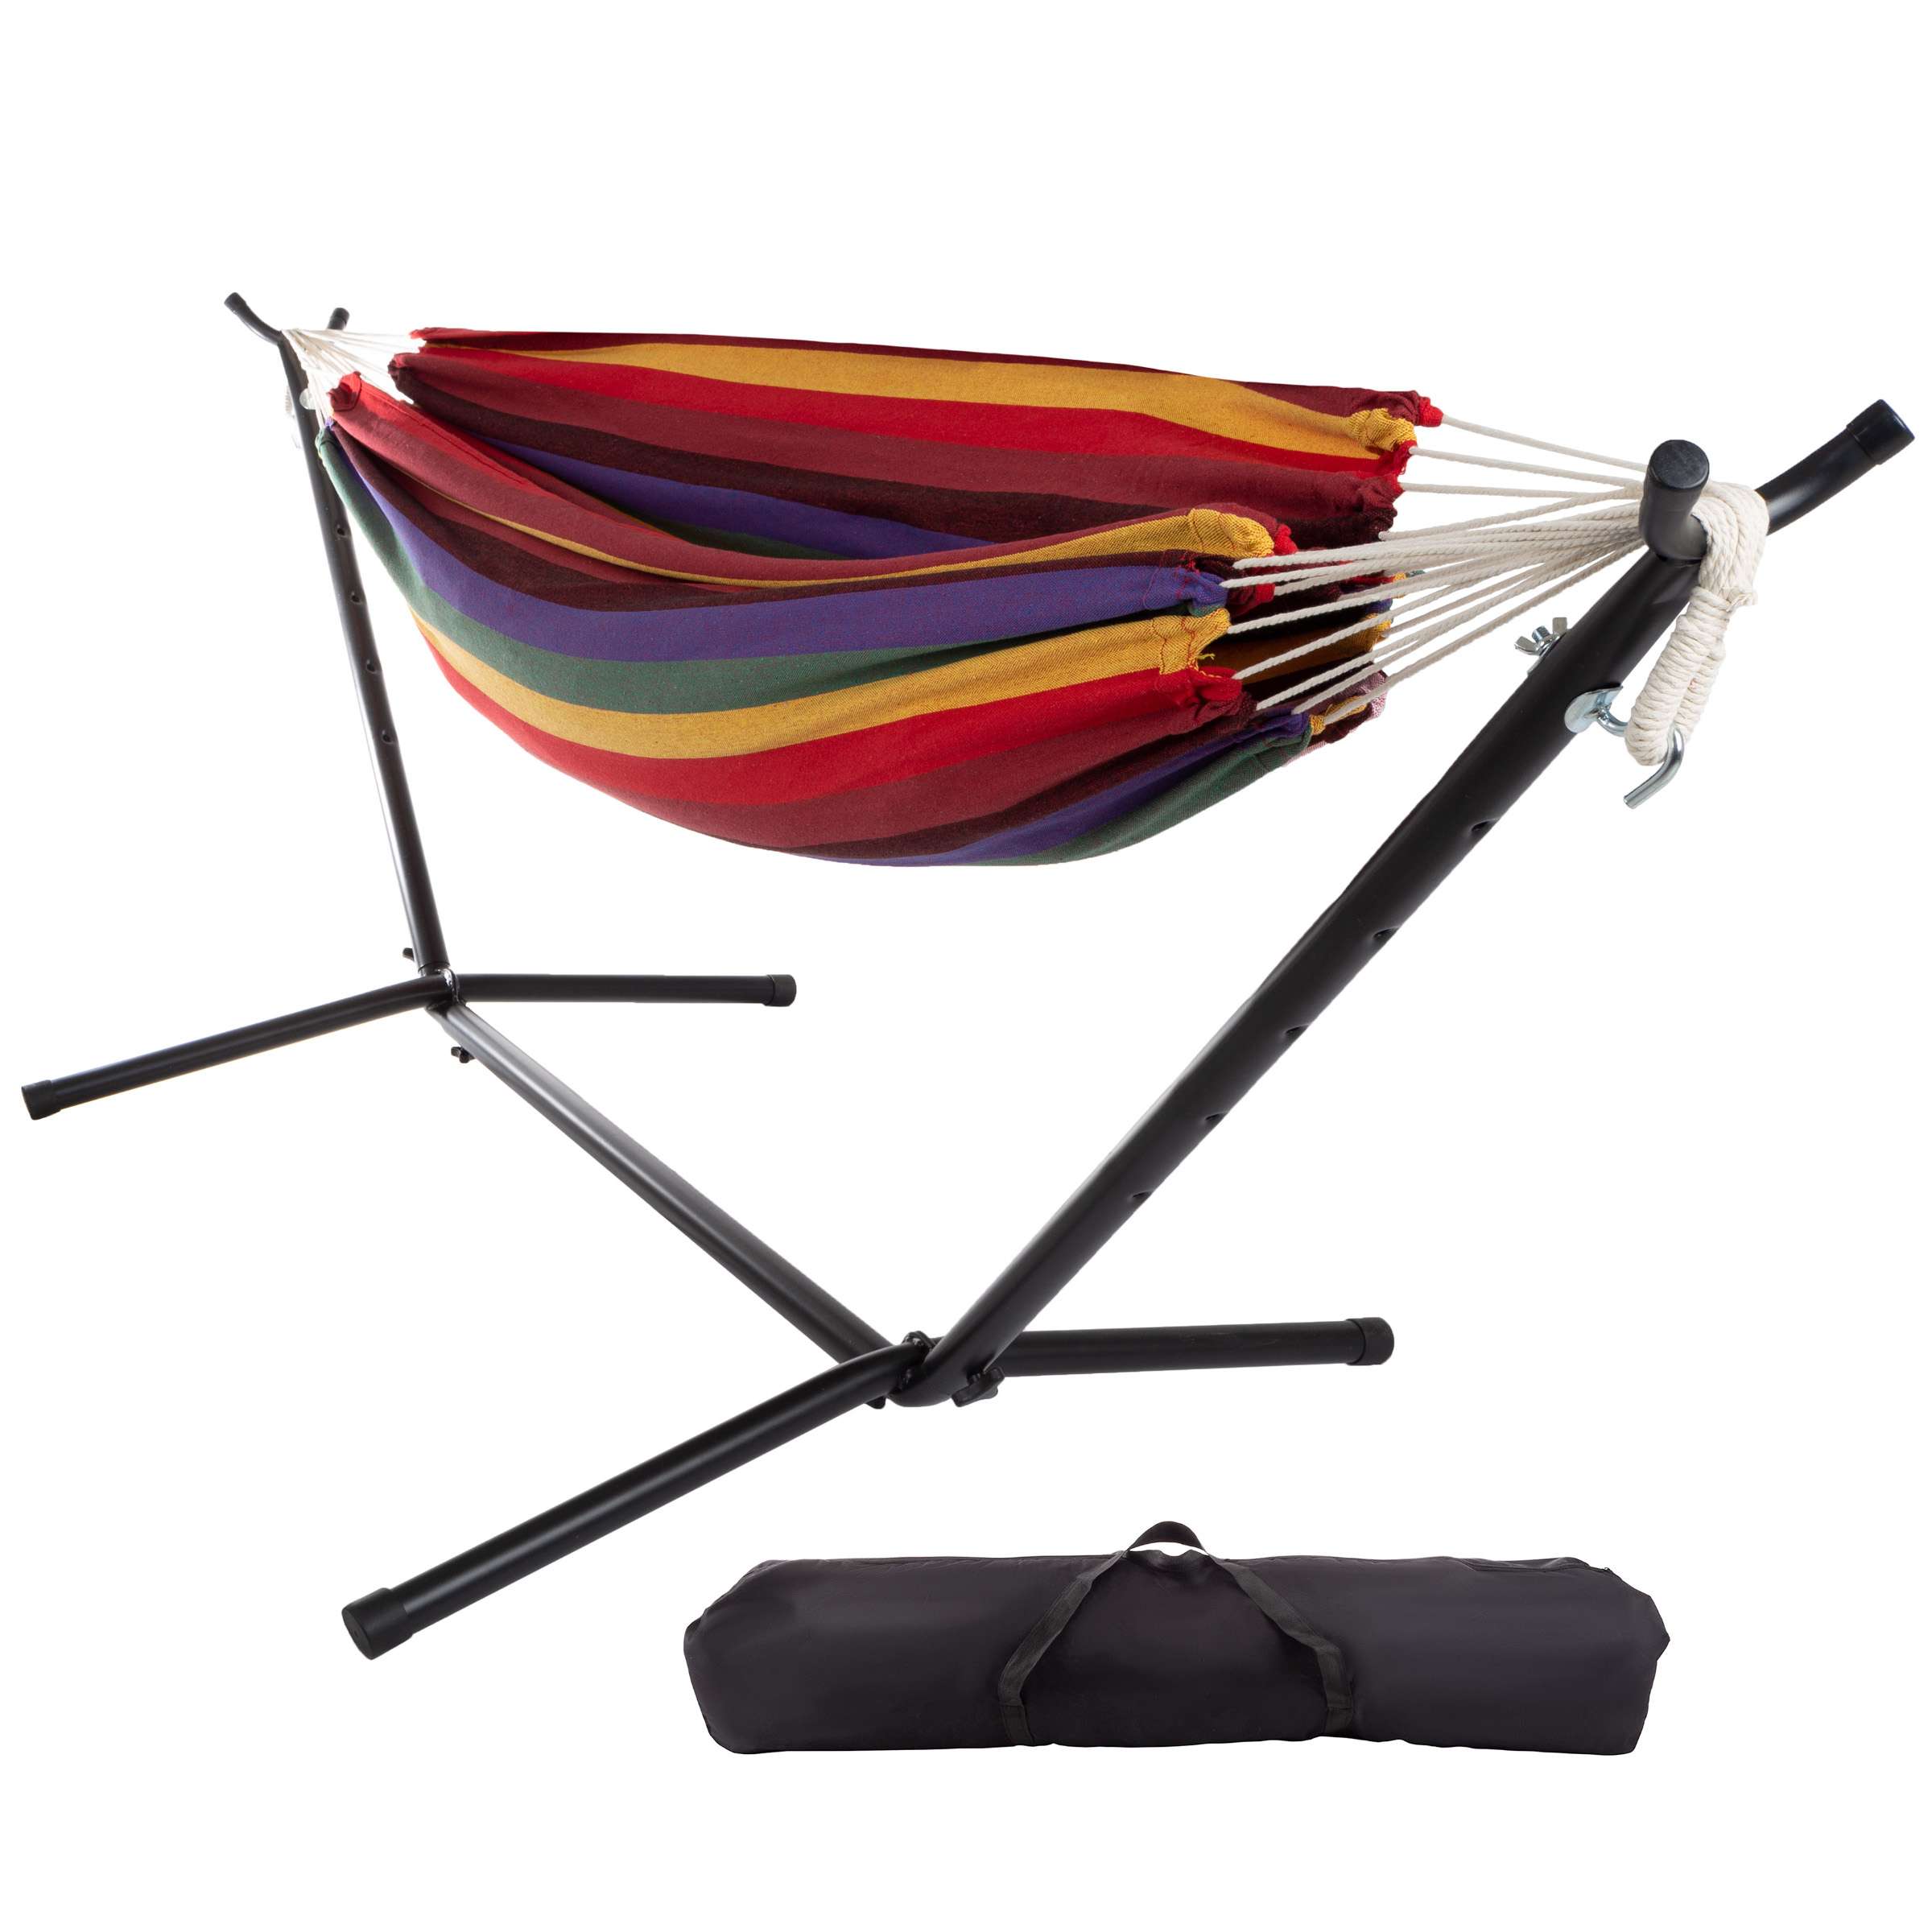 Double Hammock With Stand Carry Case Holds 400 Pounds Extra Wide - Red, Purple, And Yellow